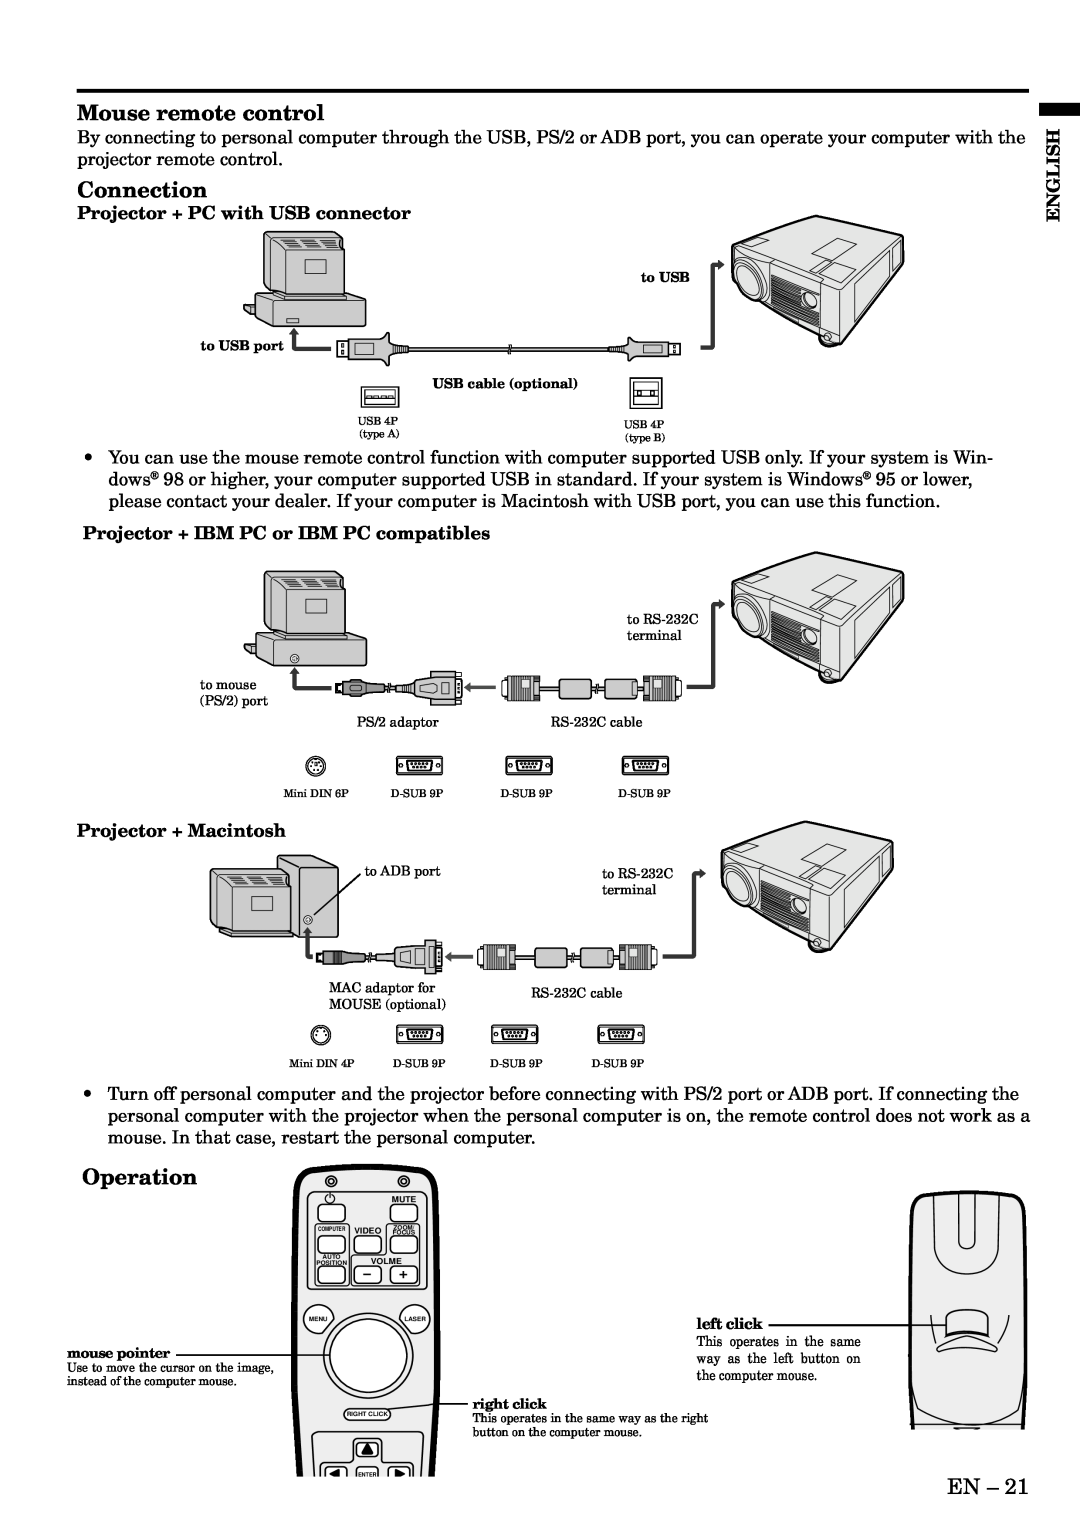 Mitsubishi Electronics S290U user manual Mouse remote control, Connection, Operation, left click 